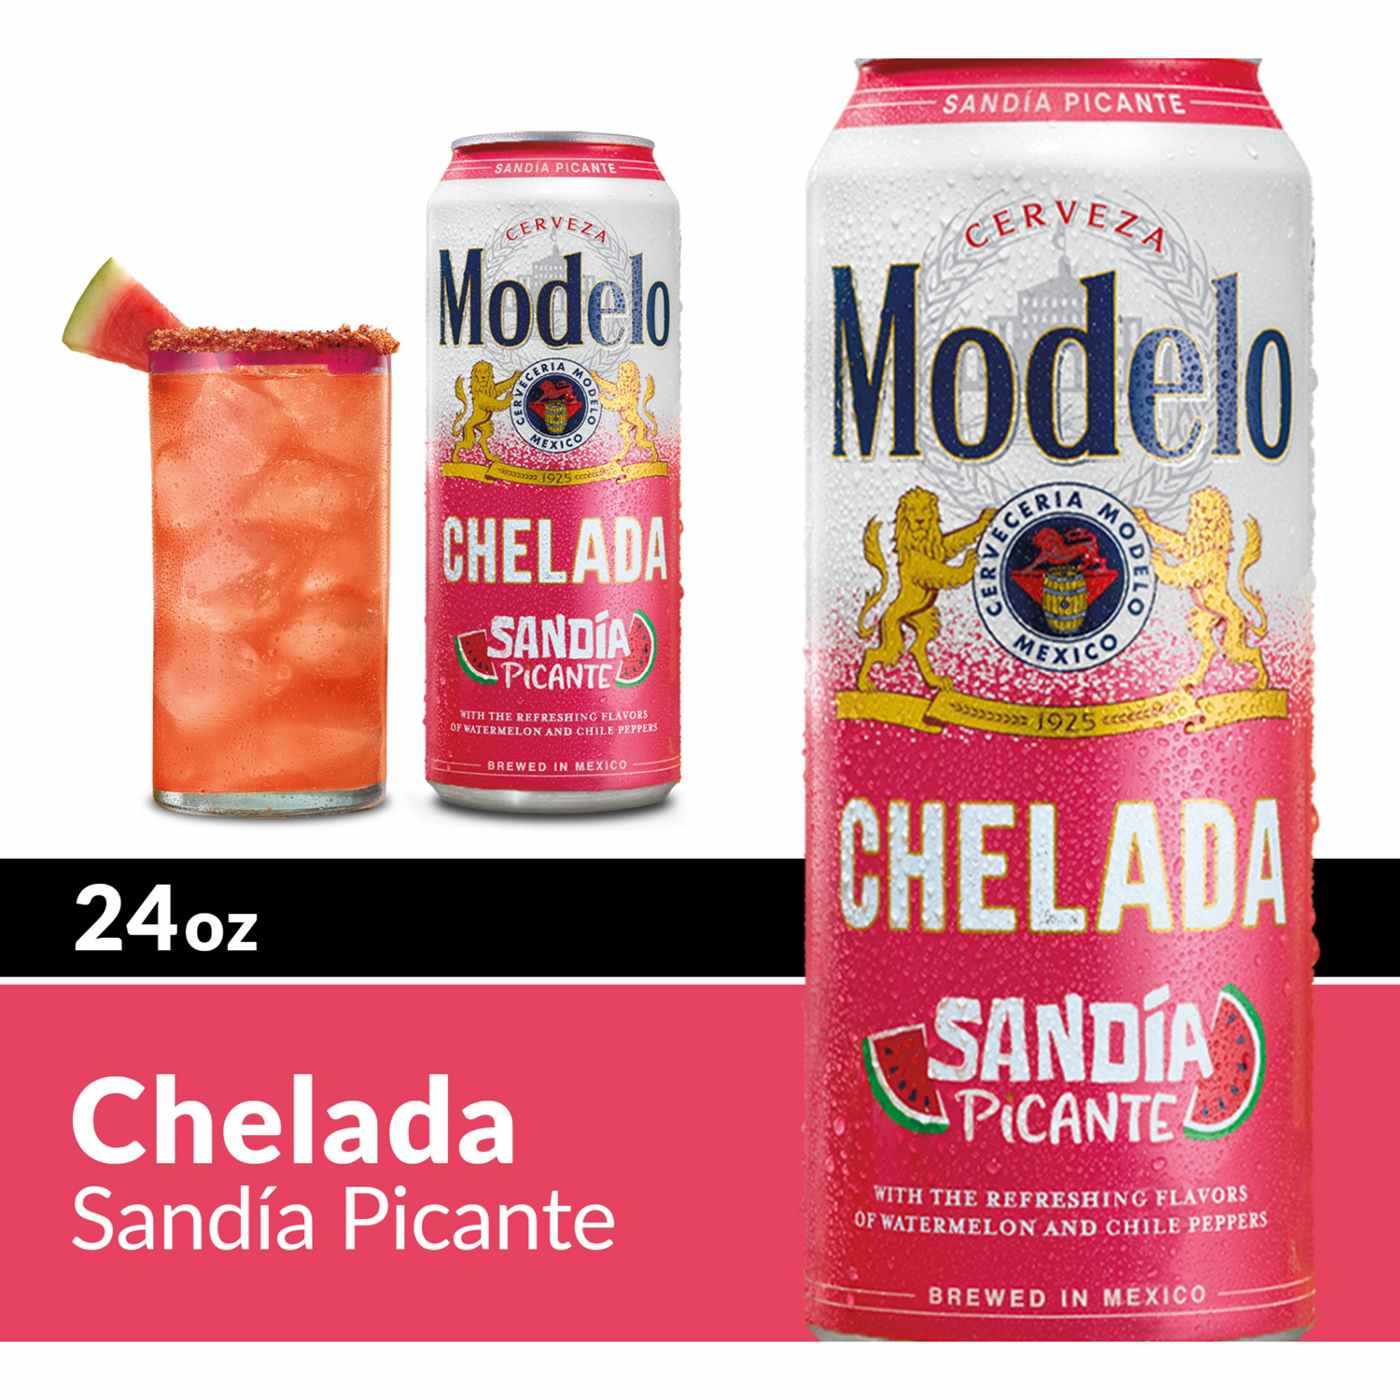 Modelo Chelada Sandia Picante Mexican Import Flavored Beer 24 oz Can; image 9 of 9